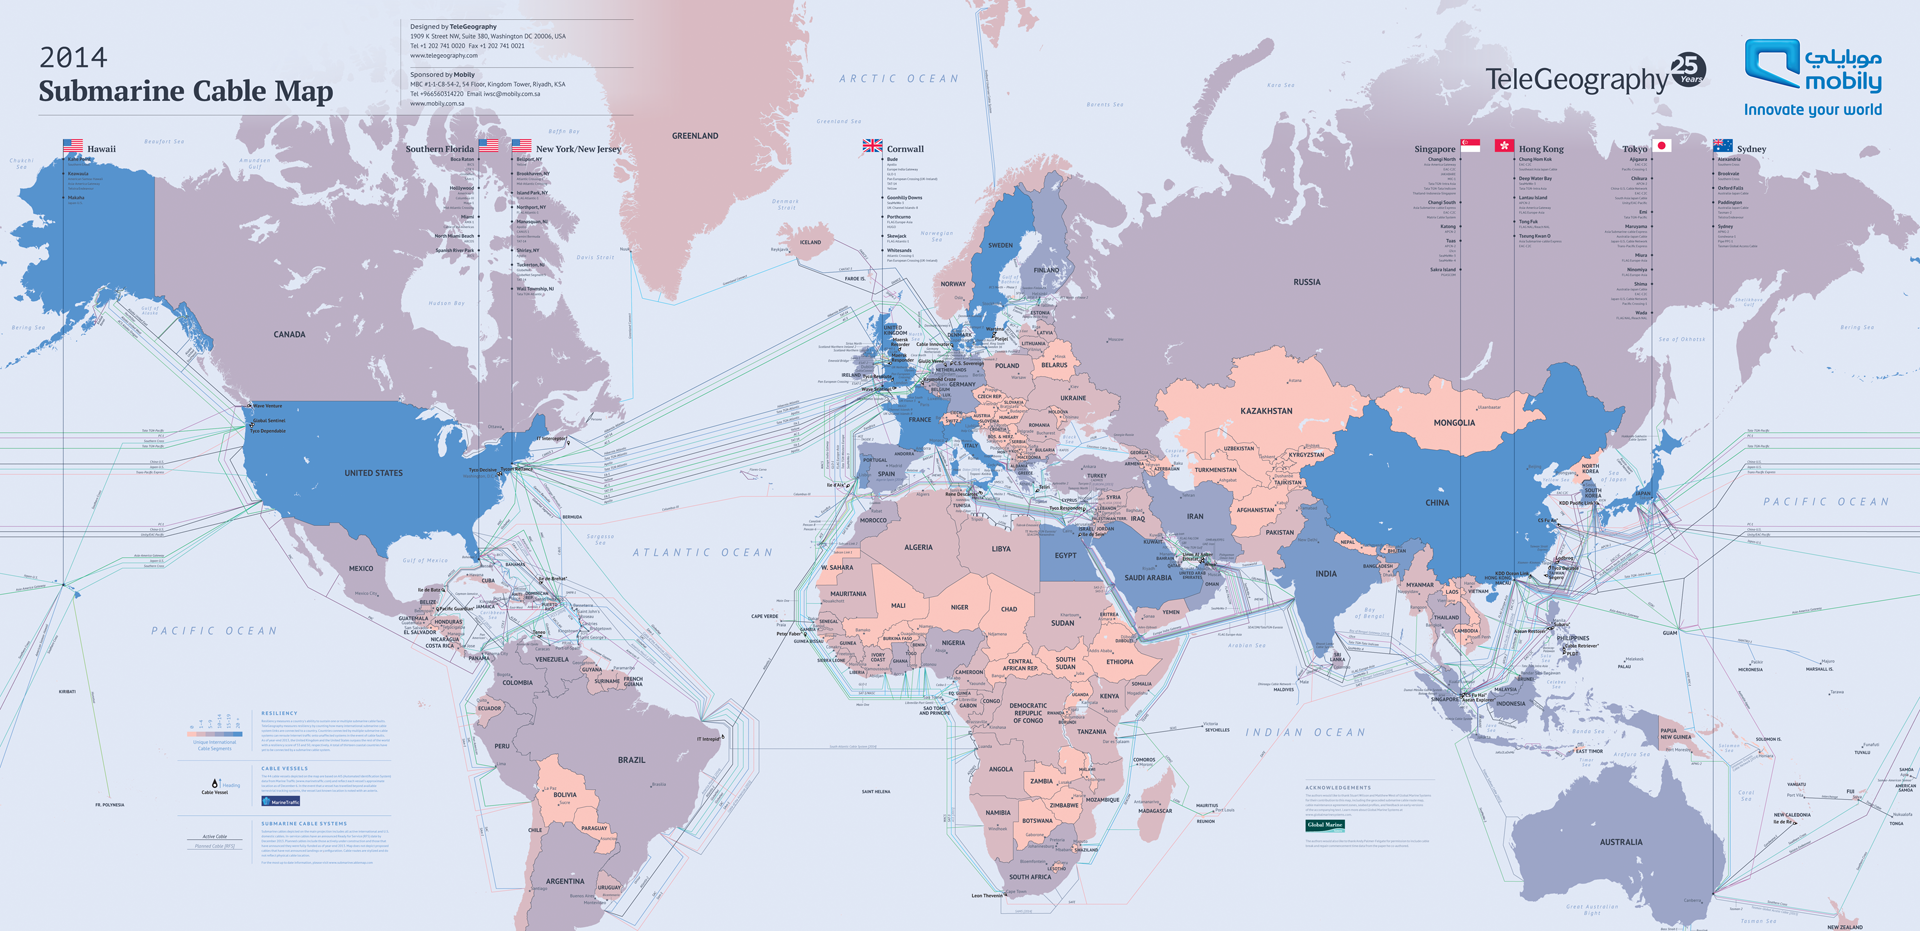 submarine-cable-map-2014-telegeography